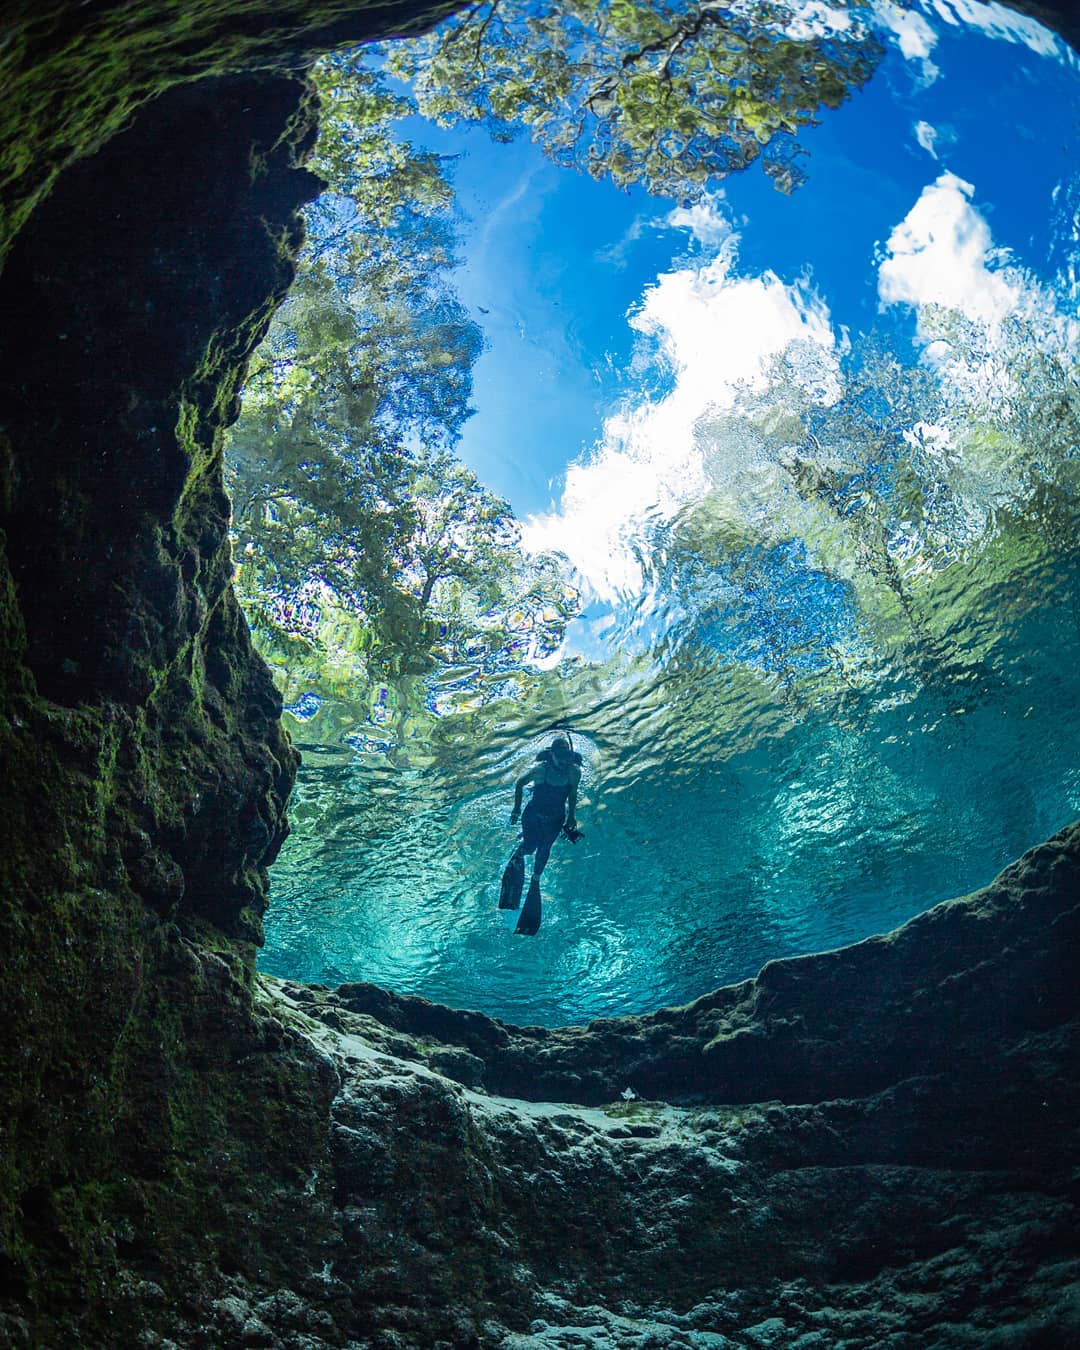 Tips For Ginnie Springs: A Perfect Florida Oasis - Florida Trippers